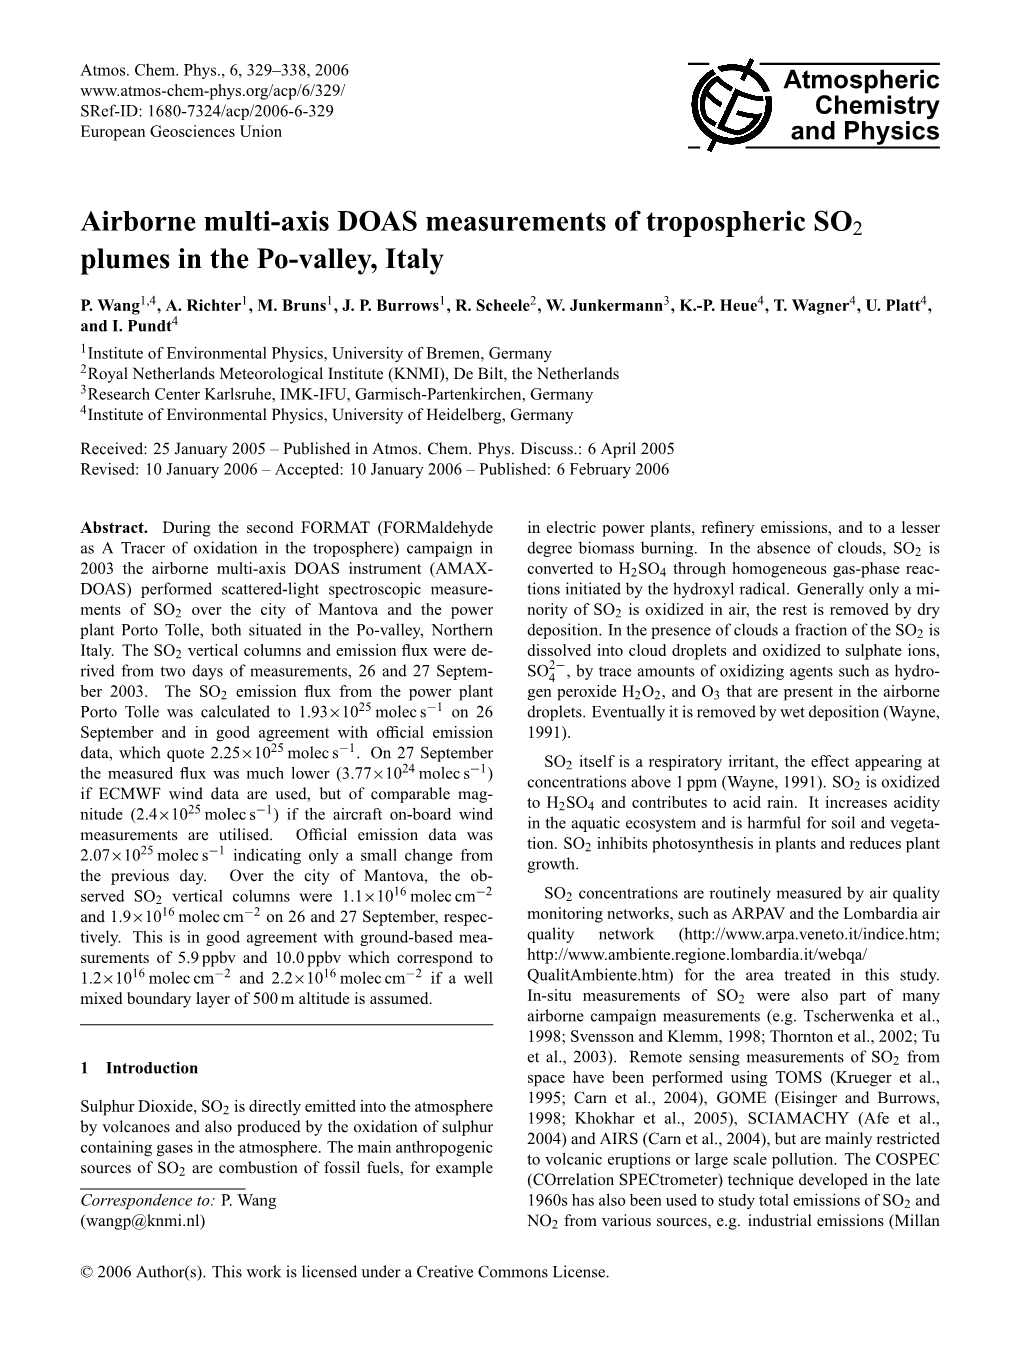 Airborne Multi-Axis DOAS Measurements of Tropospheric SO2 Plumes in the Po-Valley, Italy